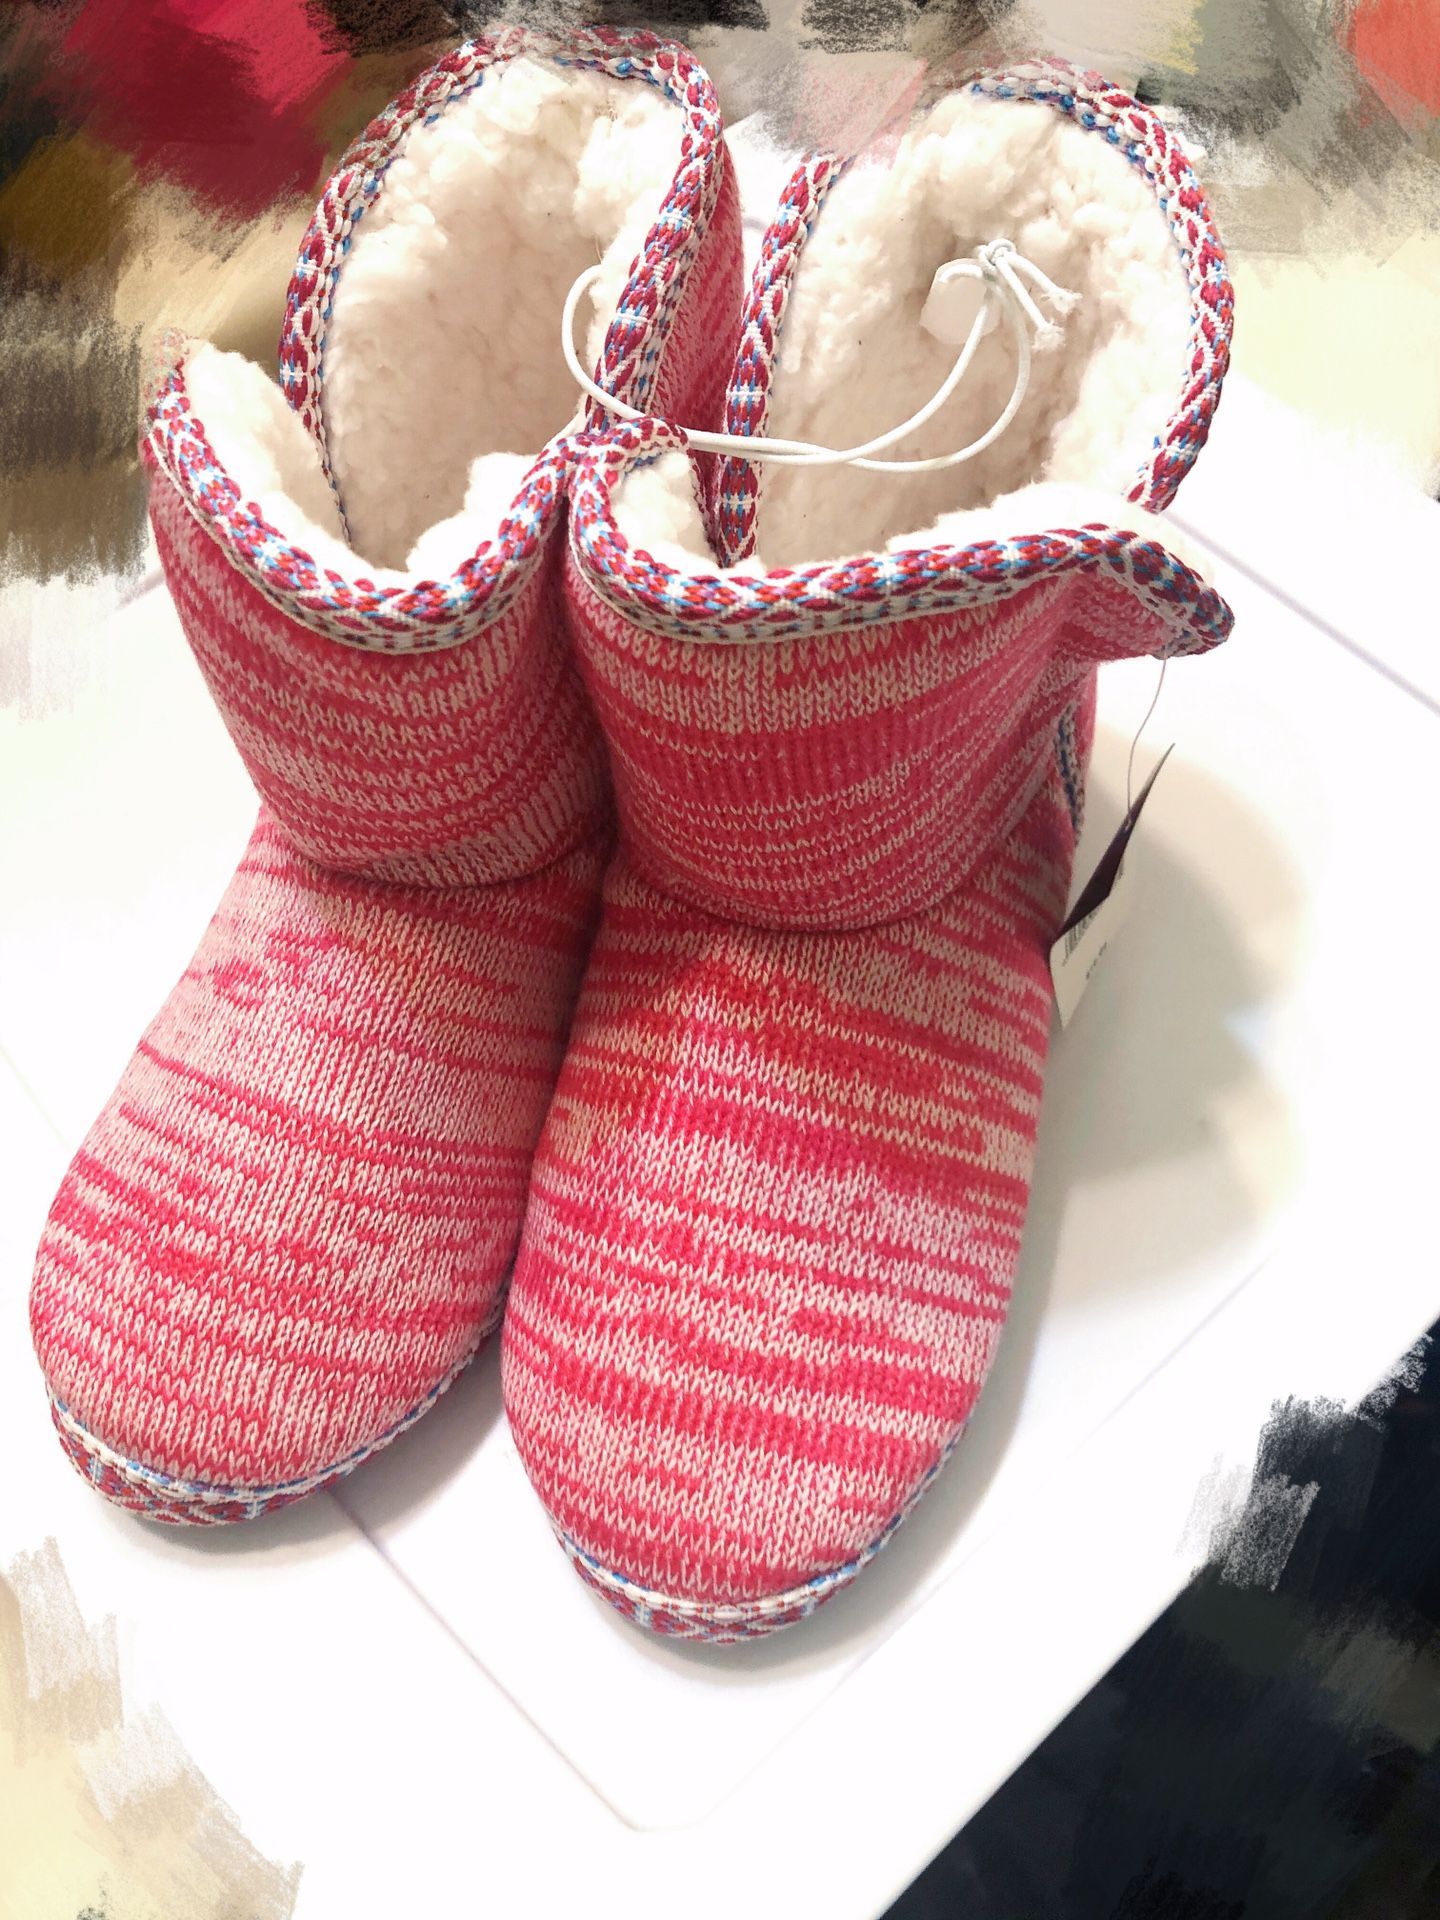 Pink boots Indoor/outdoor booties slippers rubber outsole warm & comfy Cushioned footbed size 6 7 8